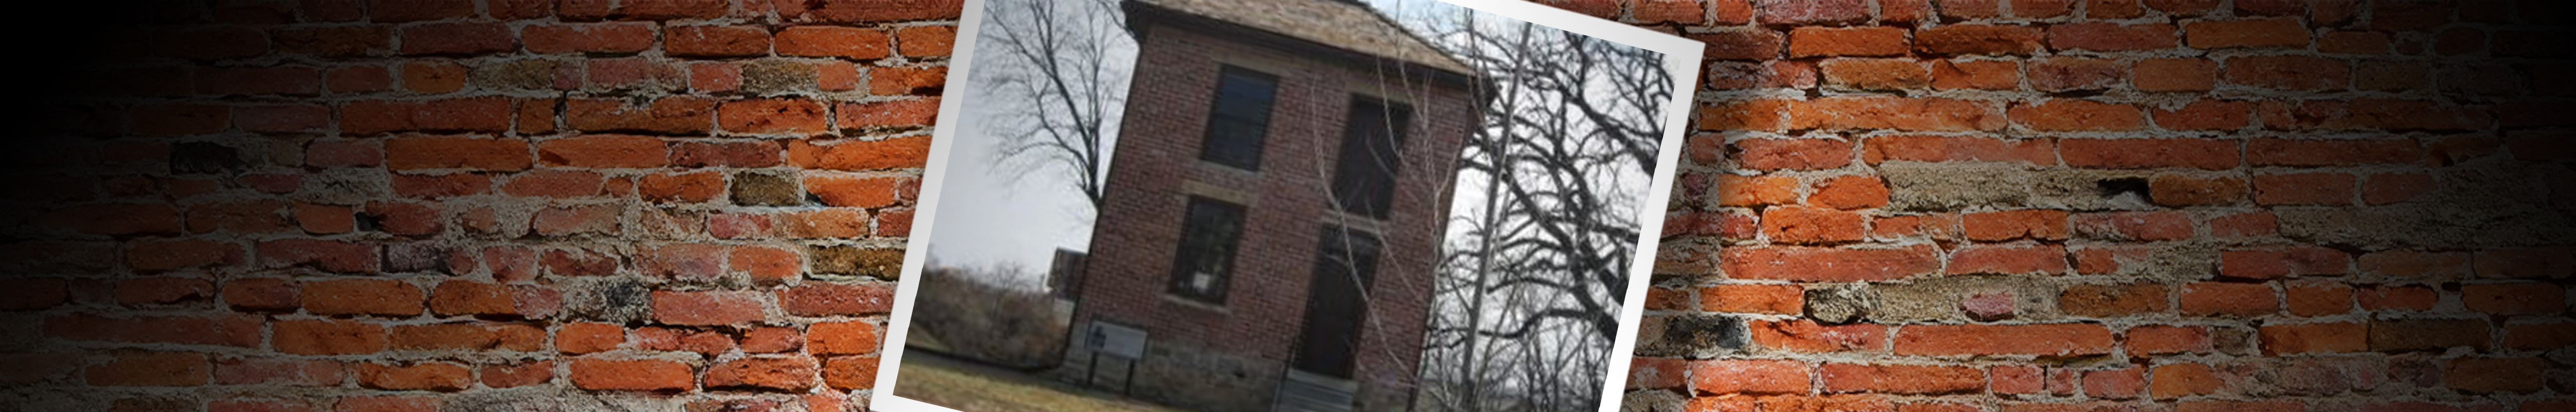 Ritchie House Featured Image 1920x500